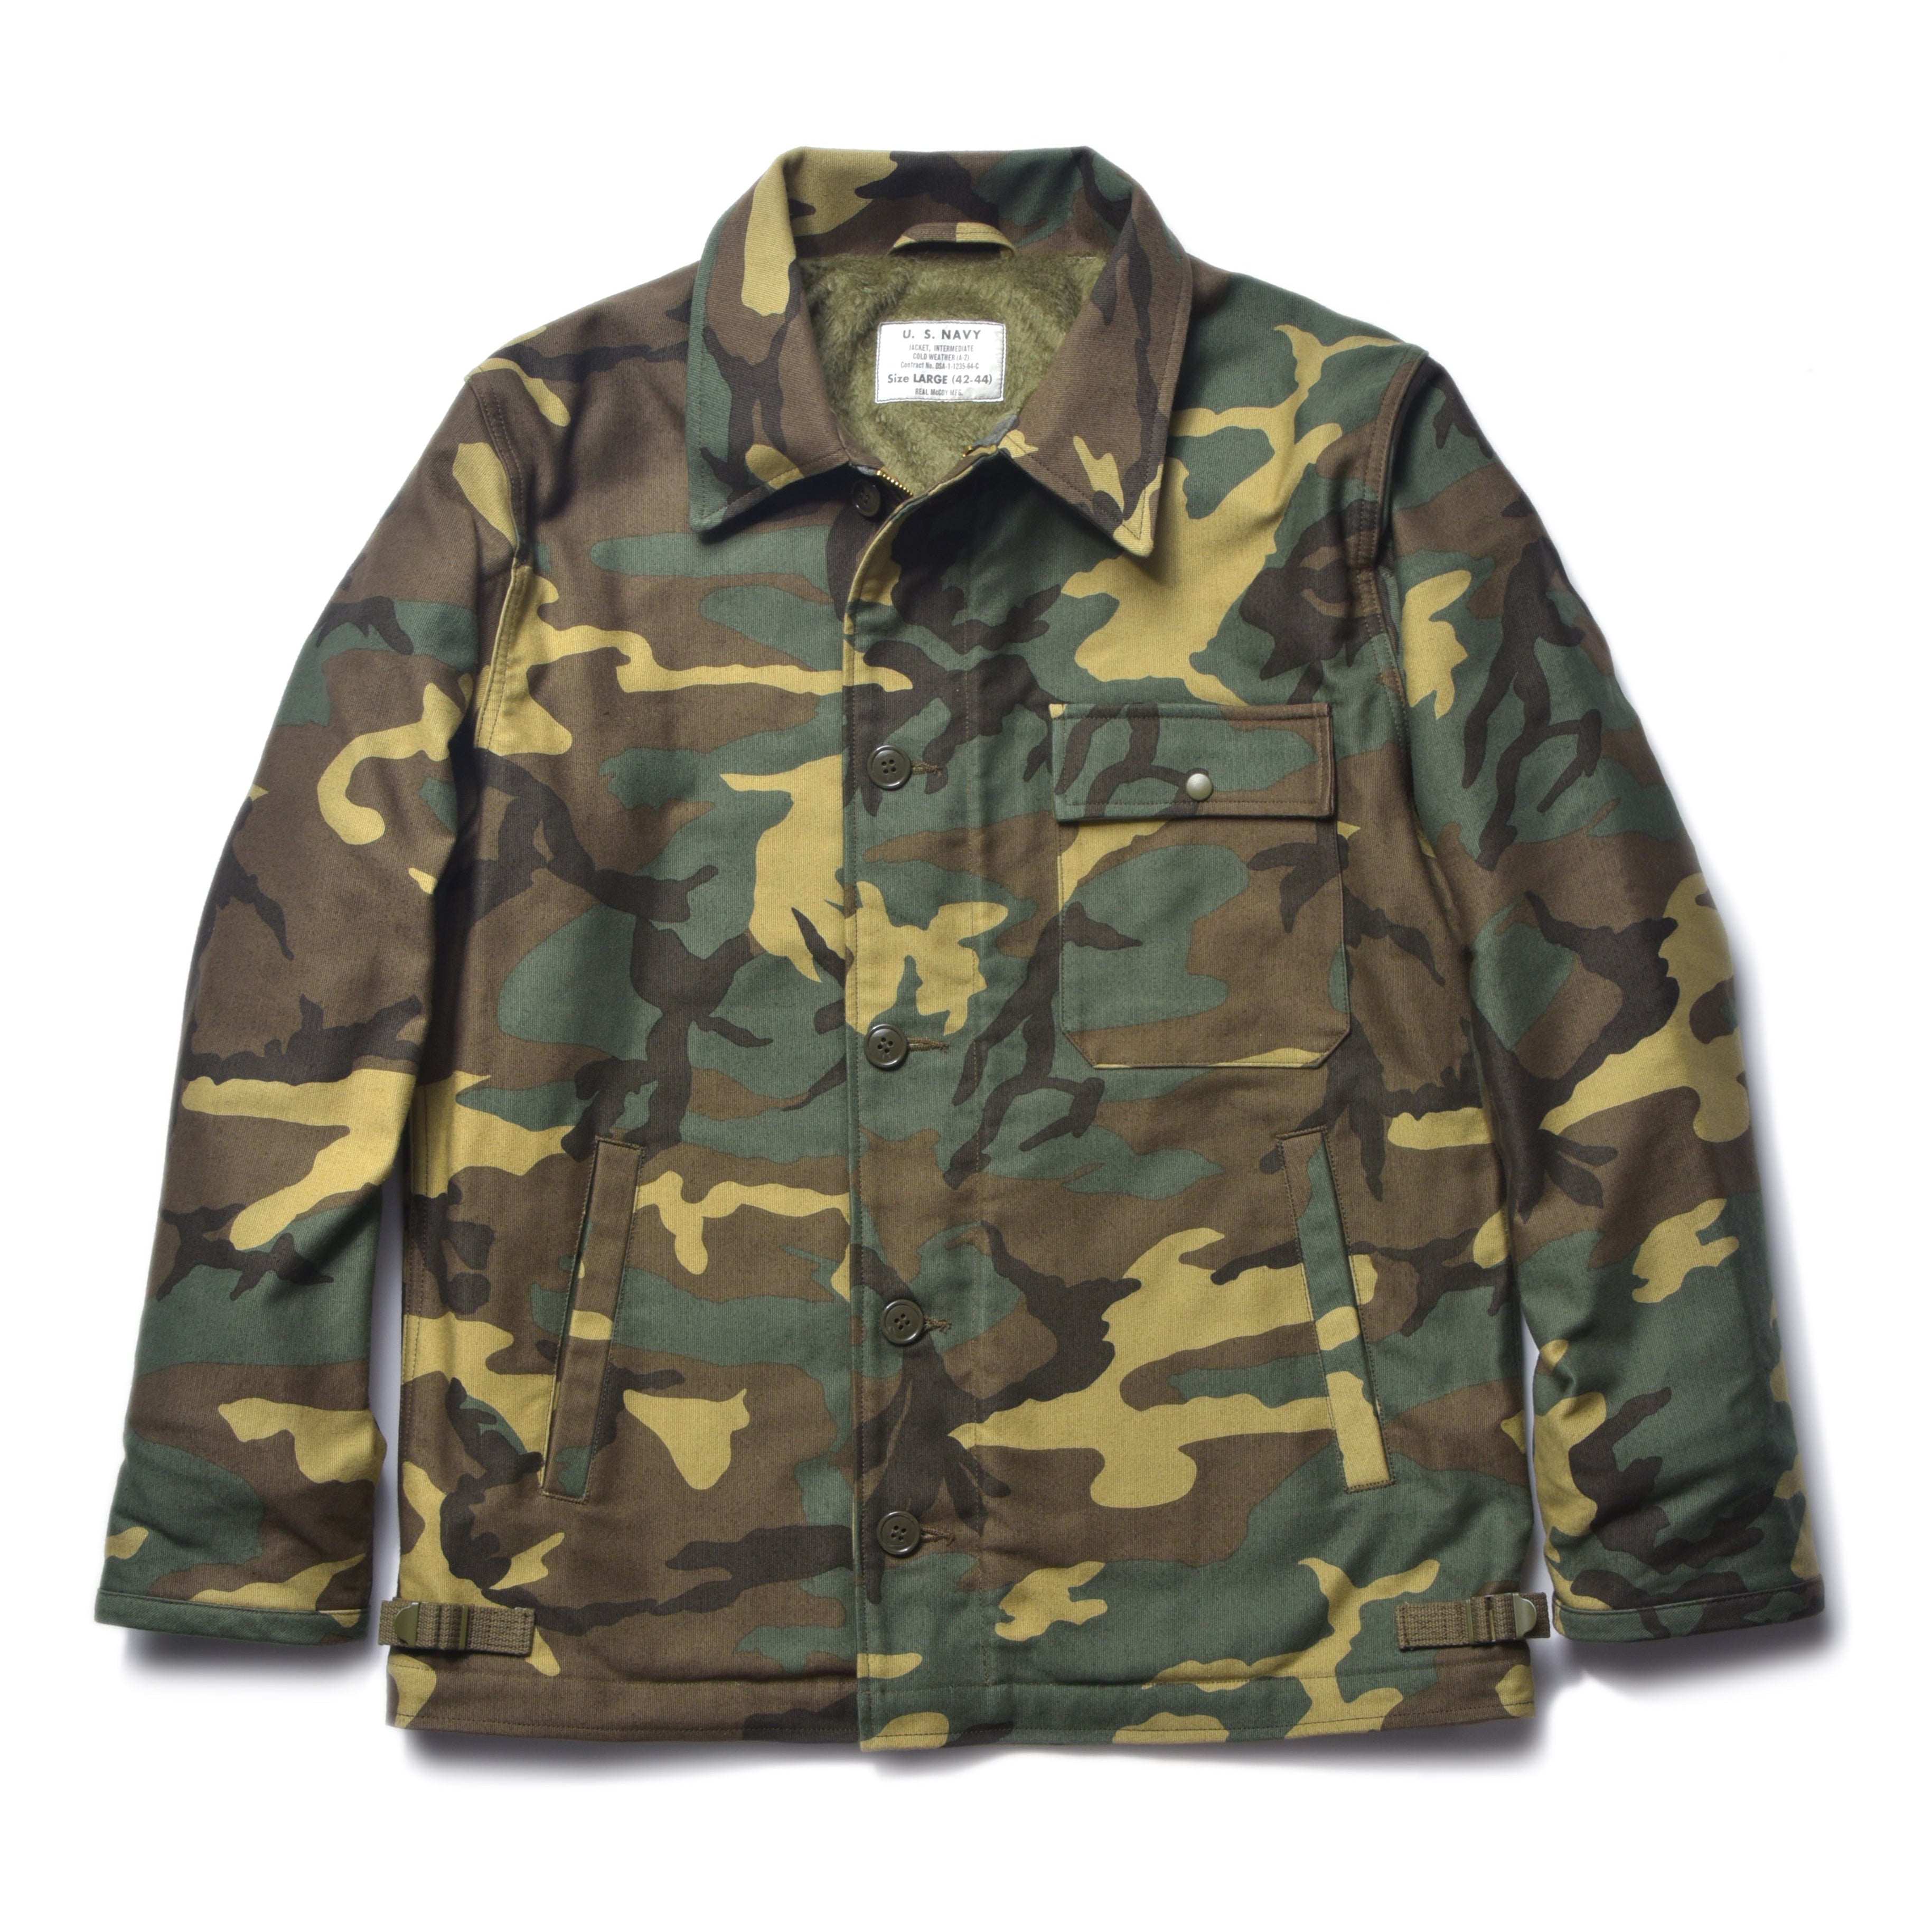 A-2 DECK JACKET / WOODLAND CAMOUFLAGE – The Real McCoy's